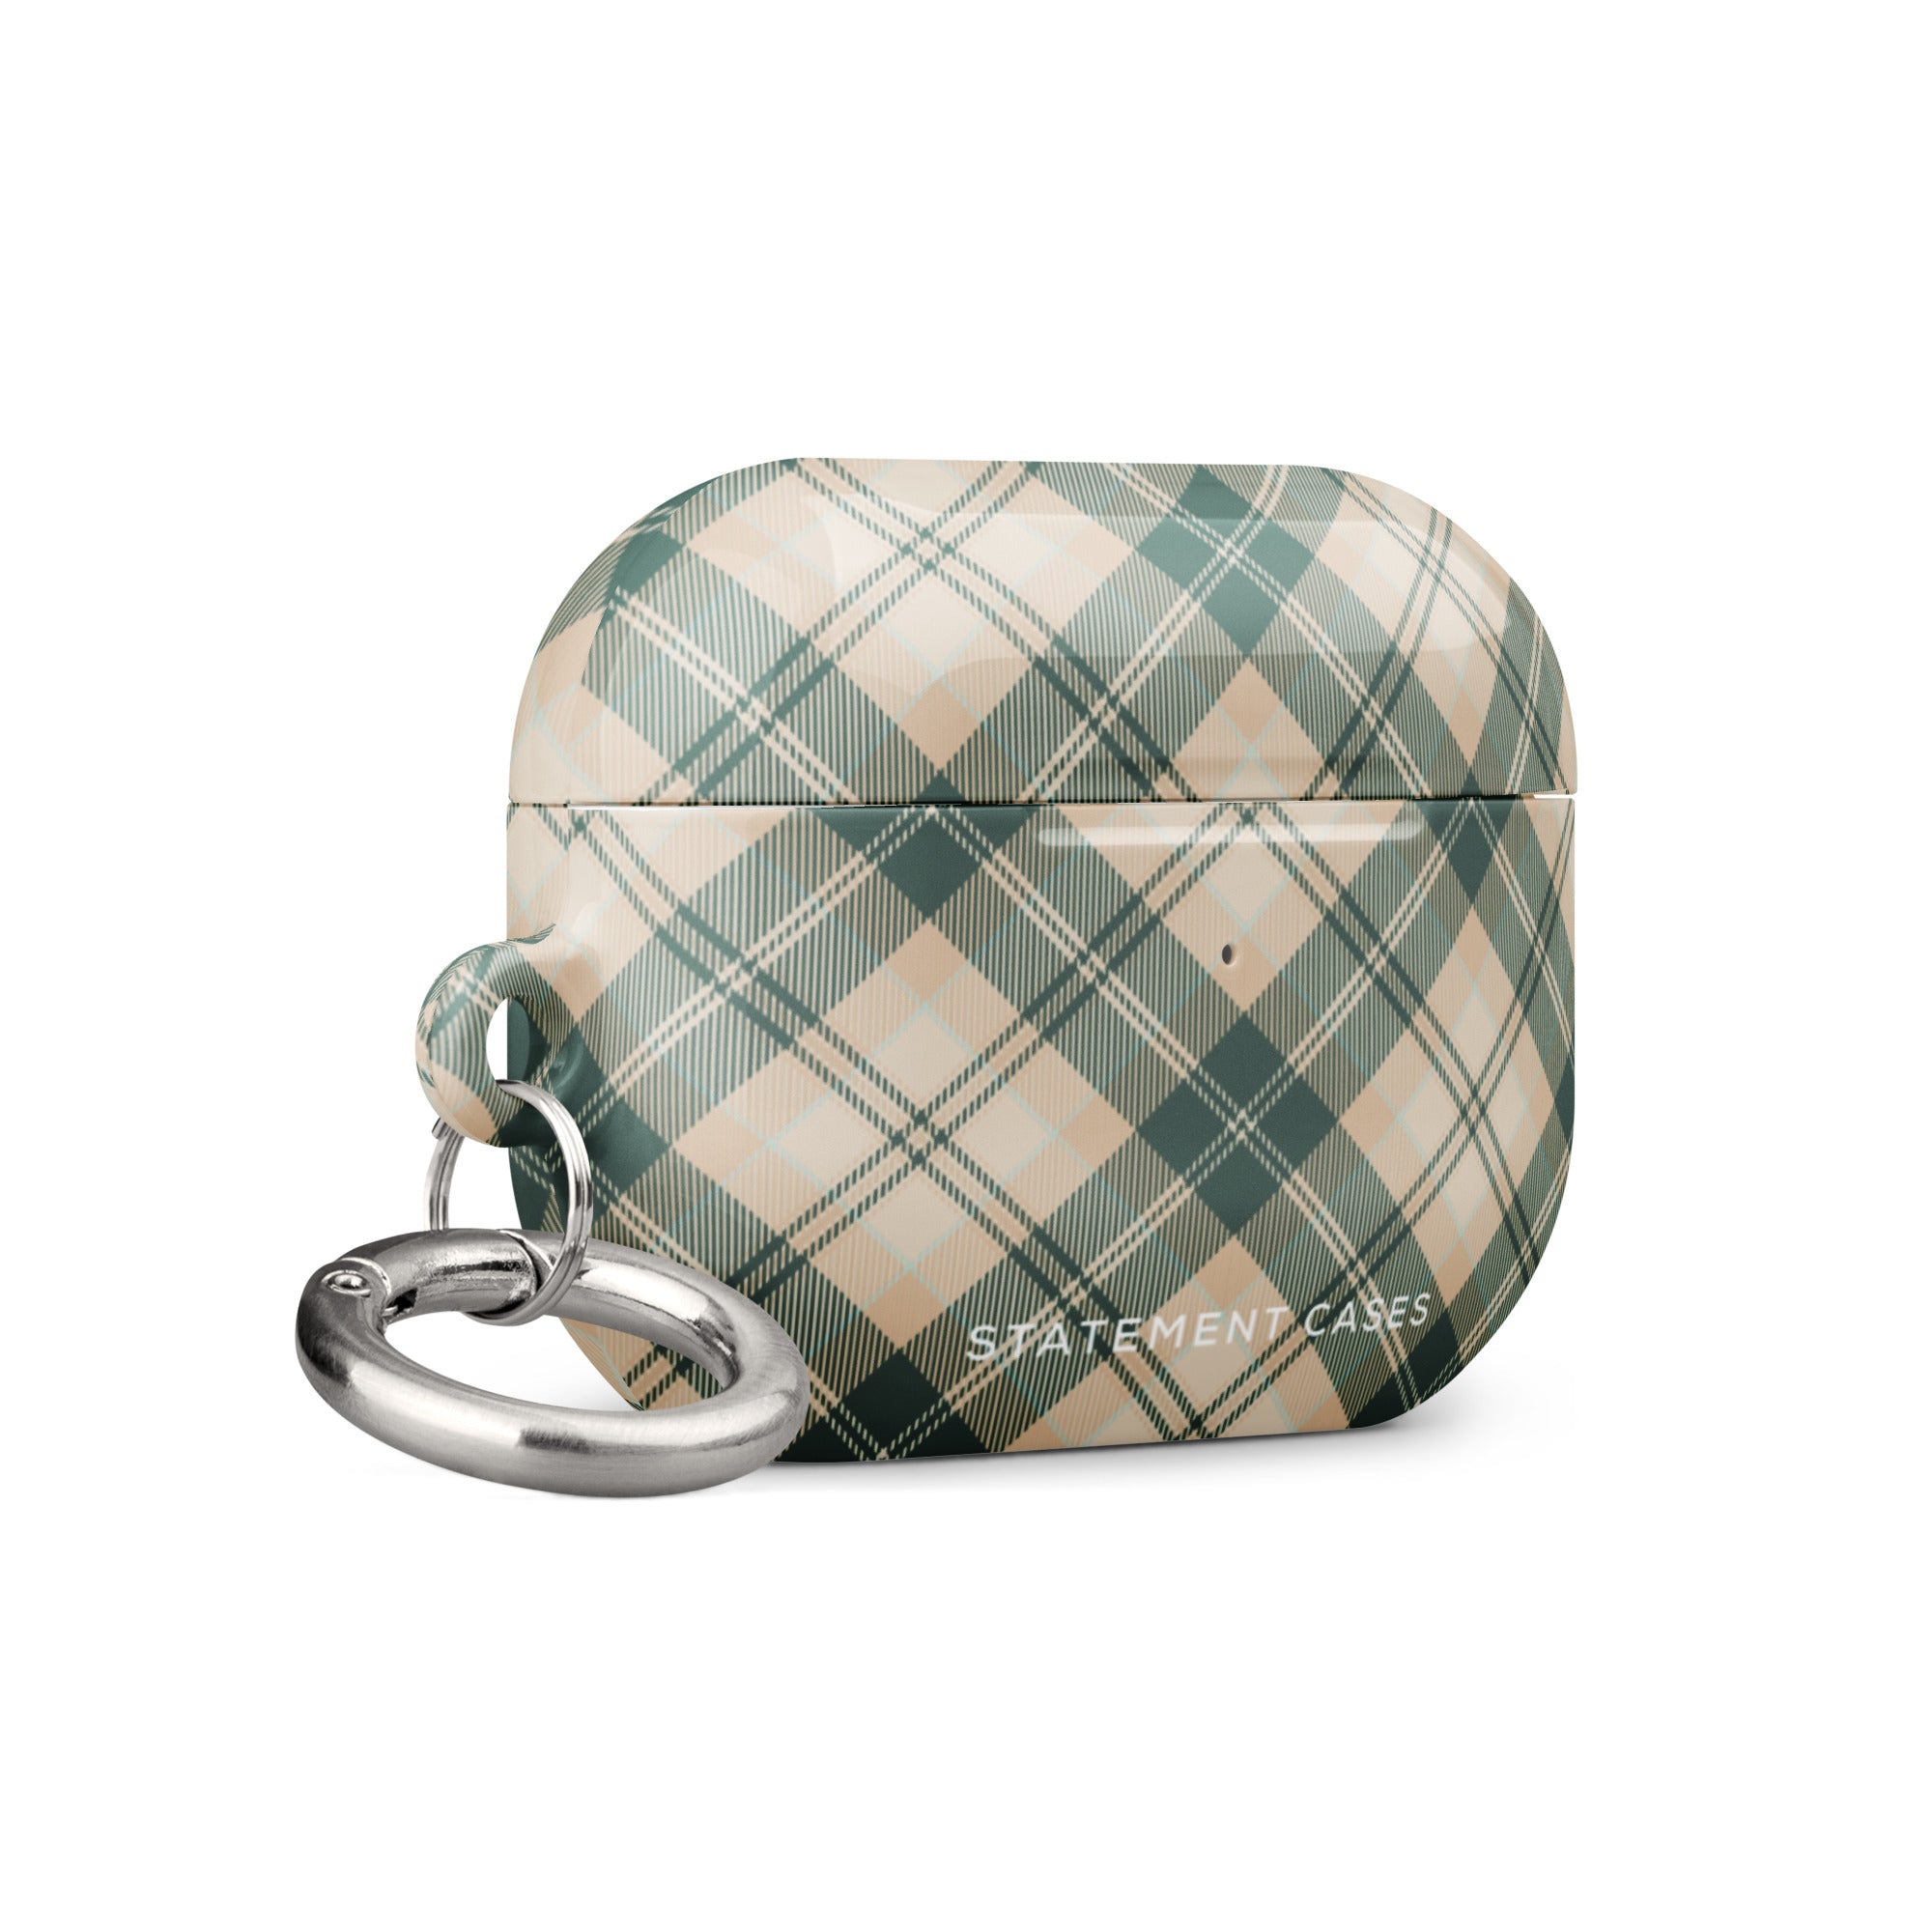 A checkered Aristocrats Plaid for AirPods Pro Gen 2 by Statement Cases with a green, white, and beige plaid design. It features an impact-absorbing material for added protection and a small metallic loop on the side, attached to a metal carabiner. The words "STATEMENT CASES" are printed near the bottom on the front of the case.